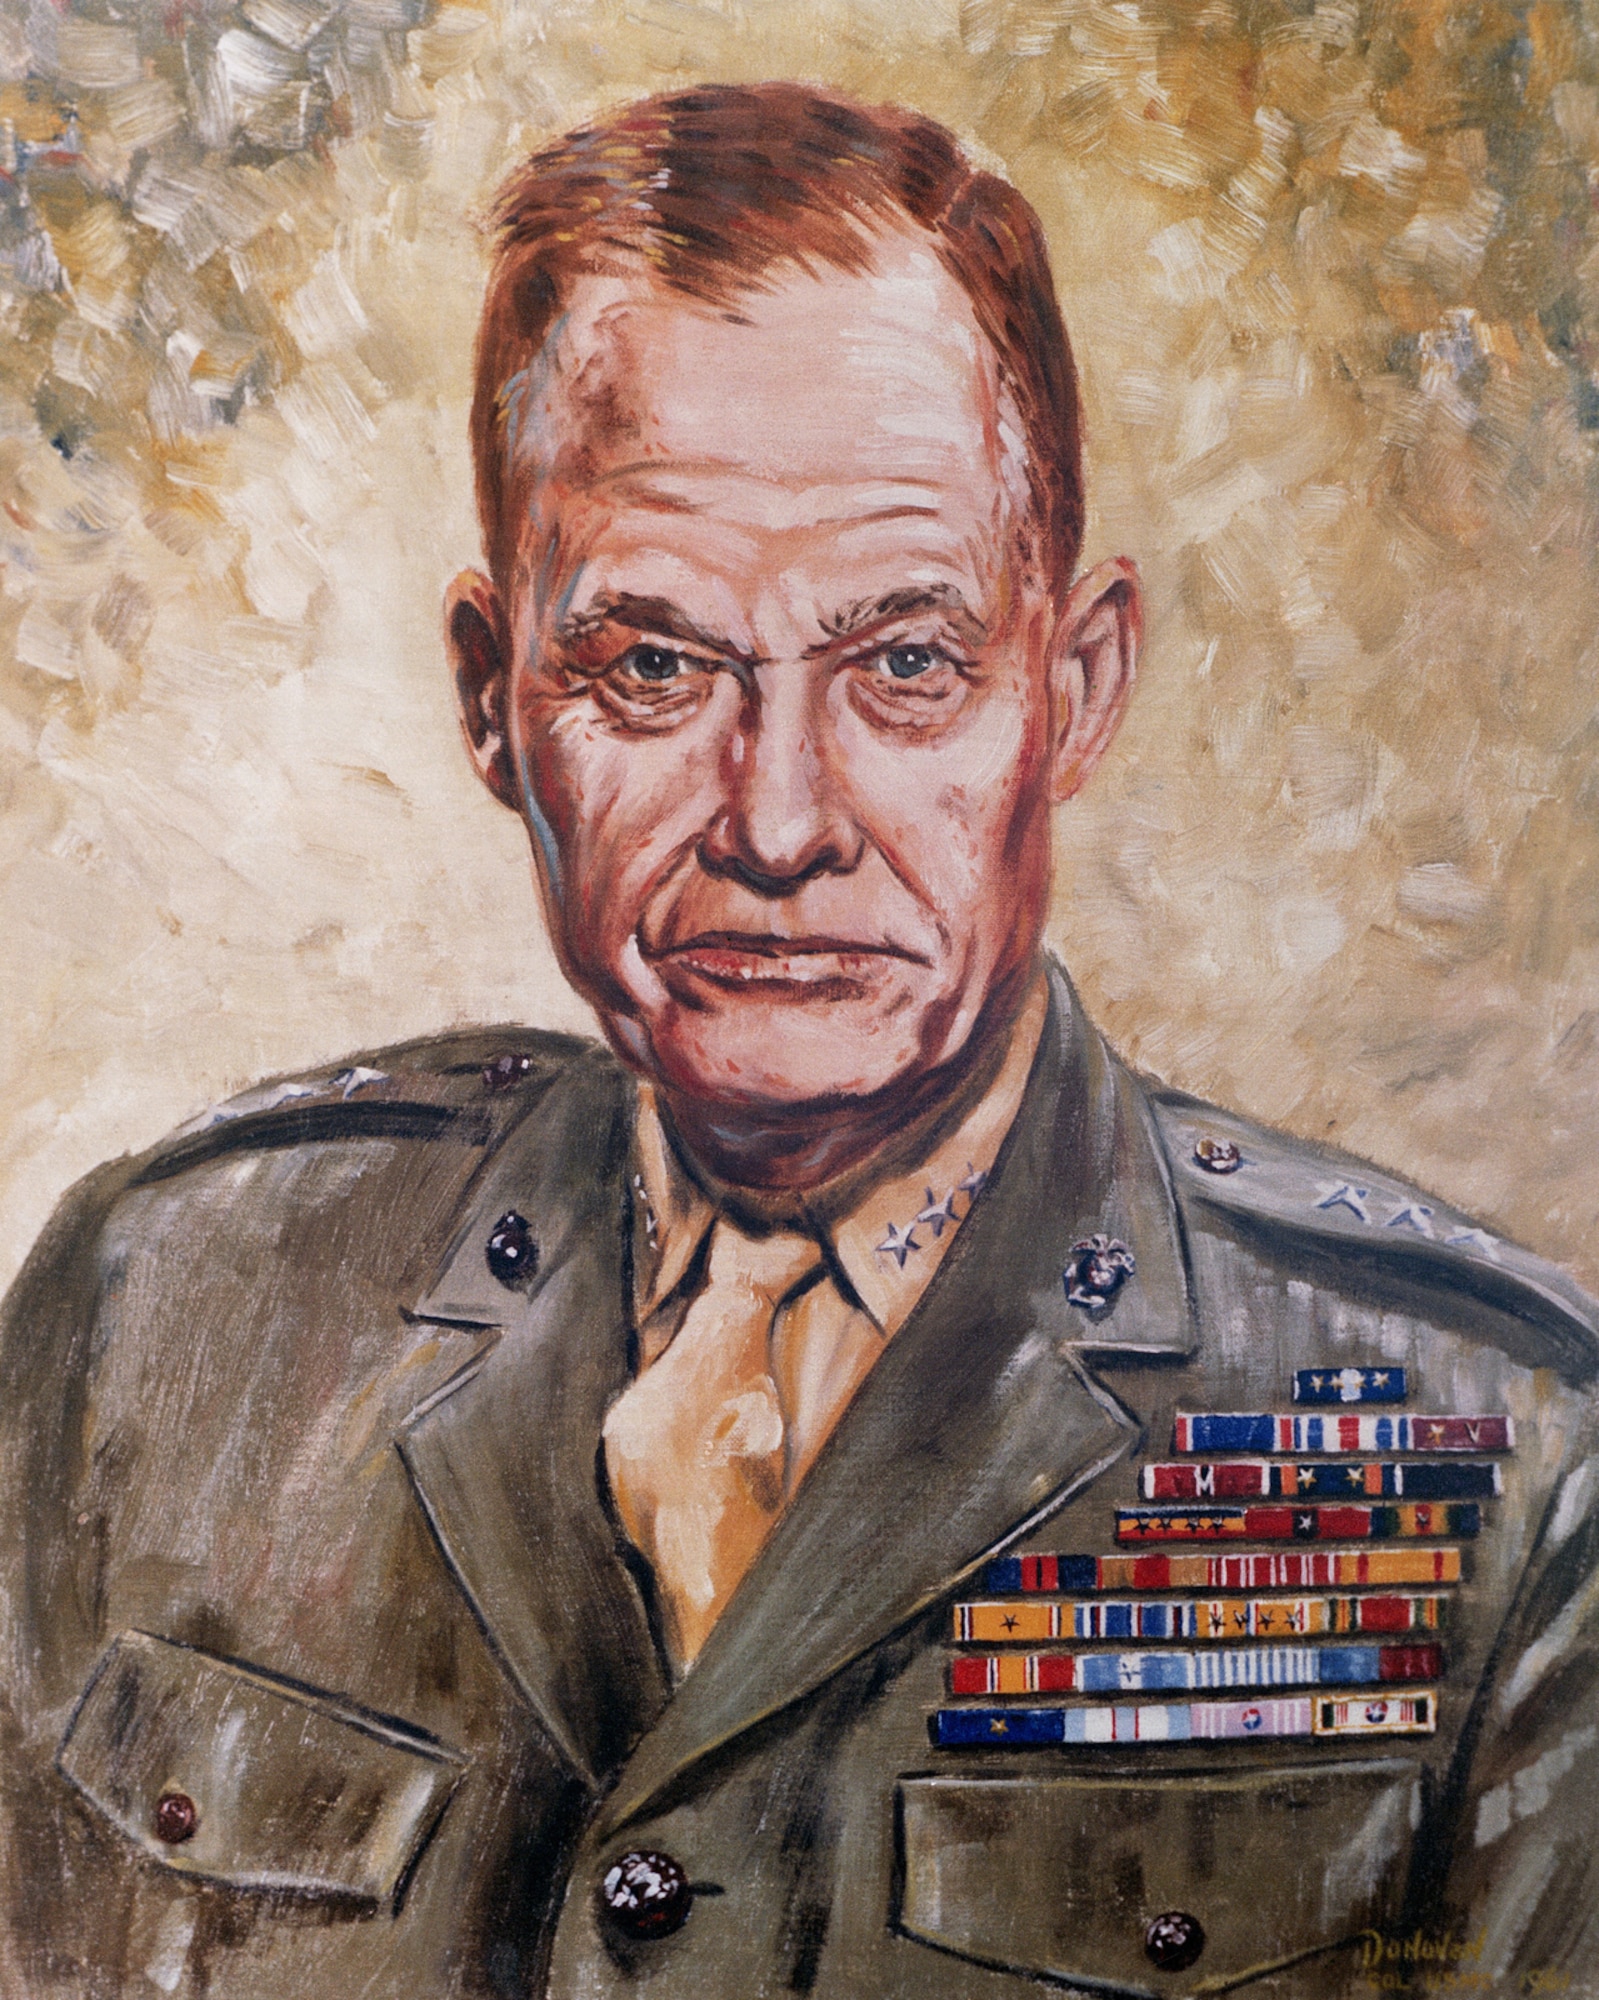 Retired Lt. Gen. Lewis 'Chesty' Puller is accounted as the most decorated Marine in history. (Courtesy photo)